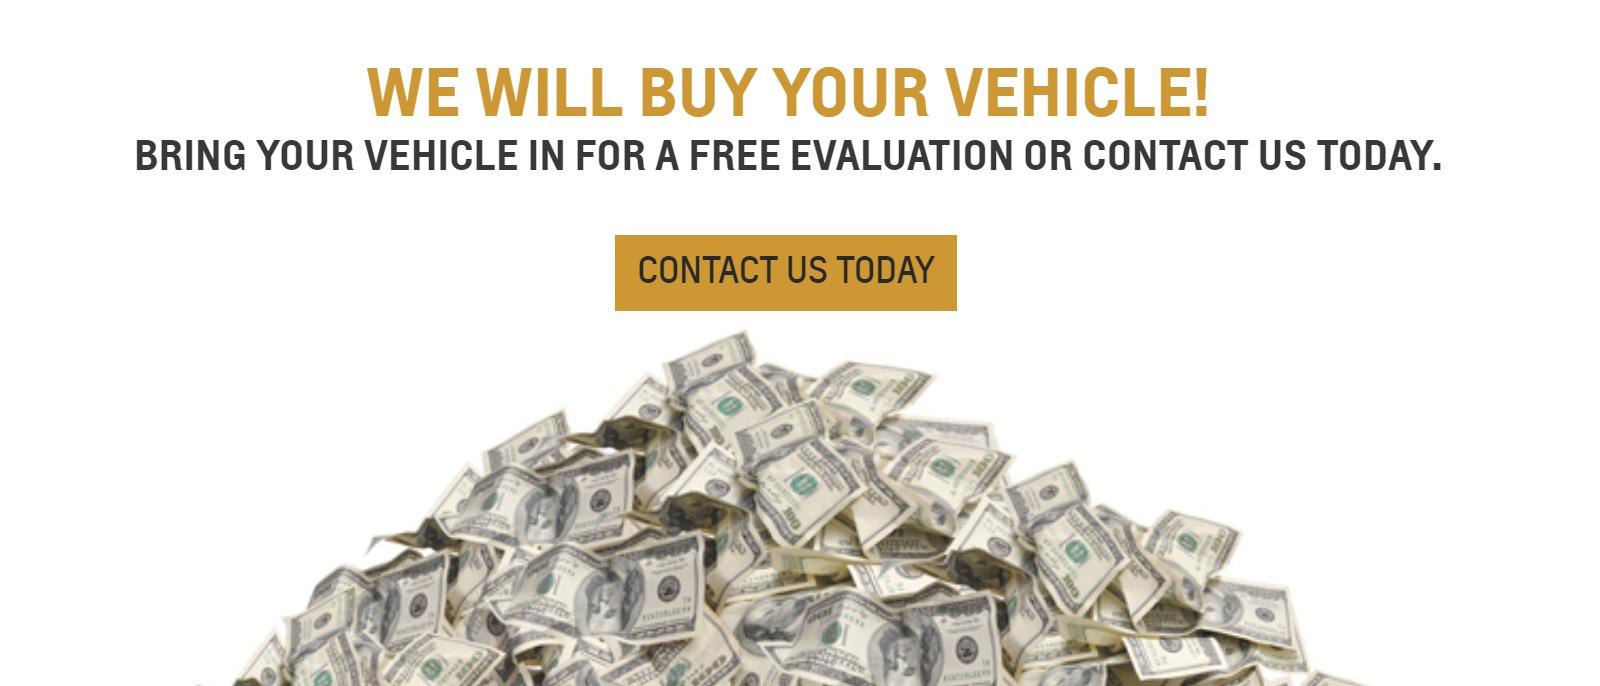 We will buy your vehicle! Bring your vehicle in for a FREE evaluation or contact us today.